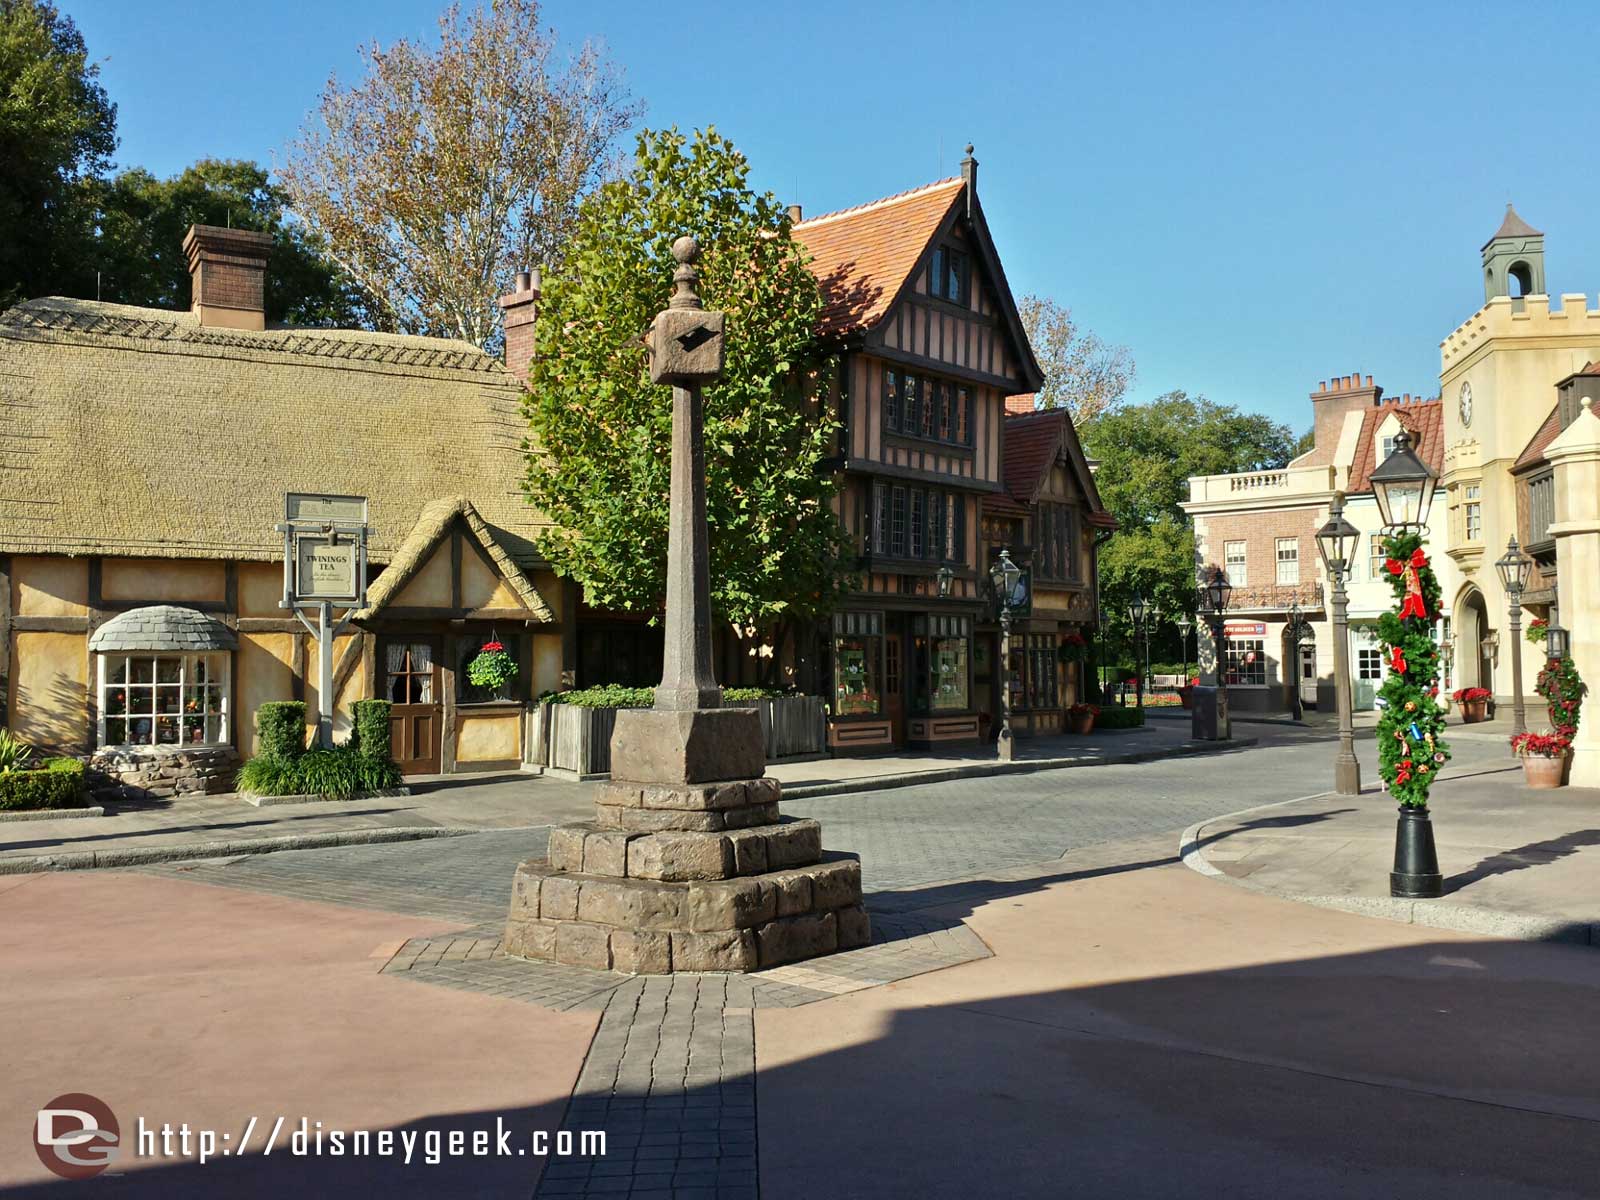 A quiet United Kingdom pavilion in the World Showcase at Epcot.